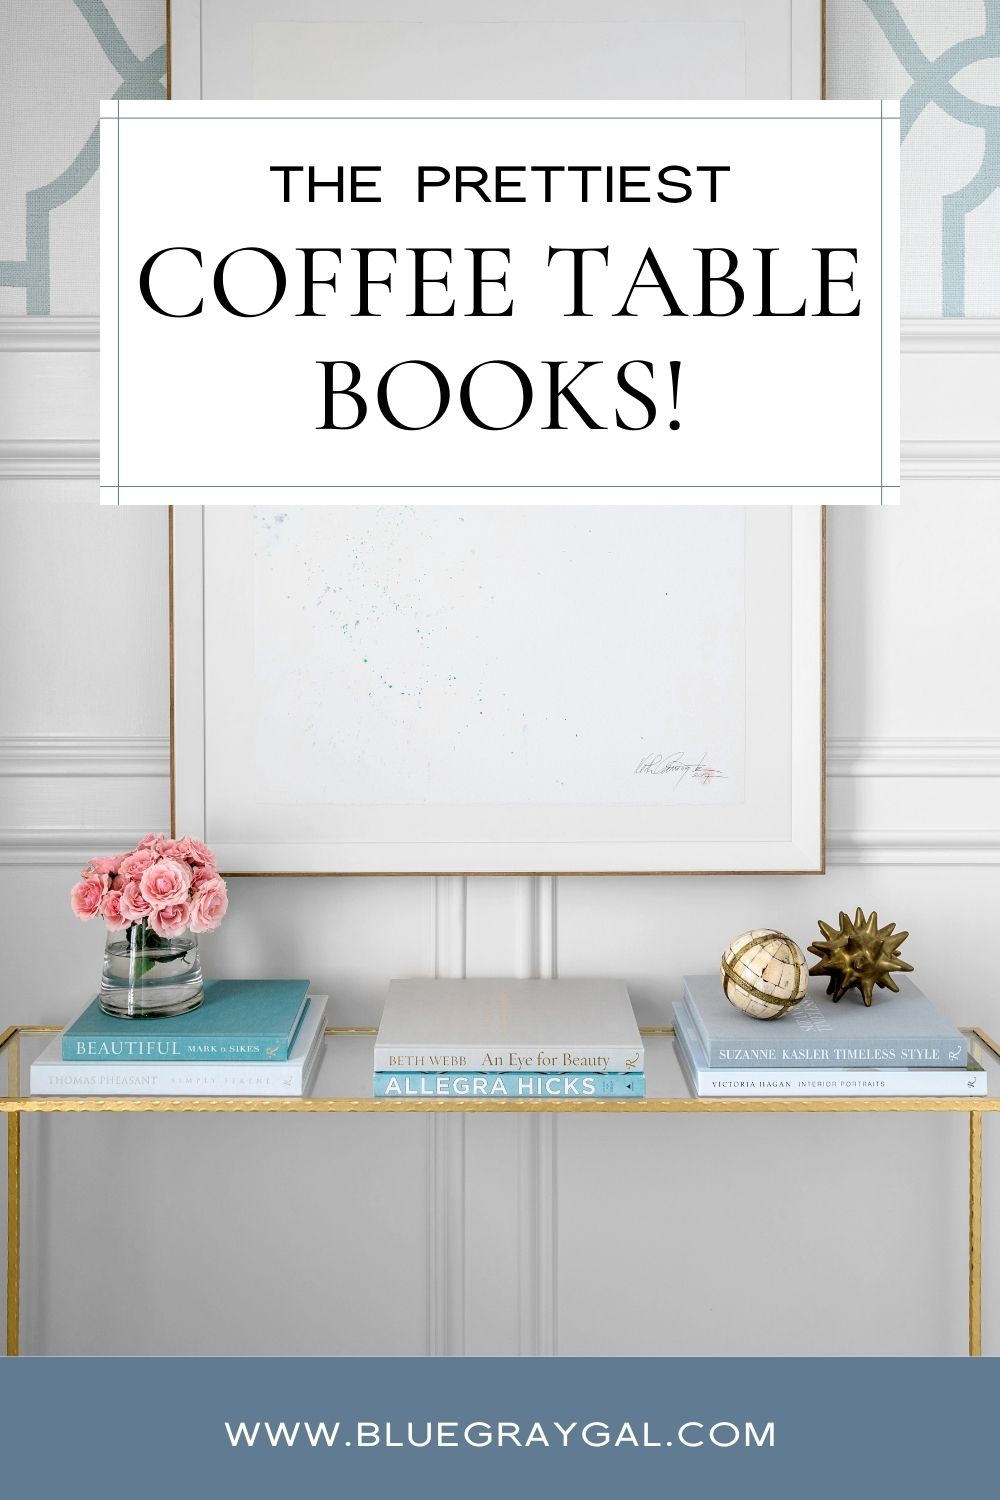 If you're wondering how to style shelves, then you'll want these decor coffee table books to finish the look or make your coffee table look amazing!